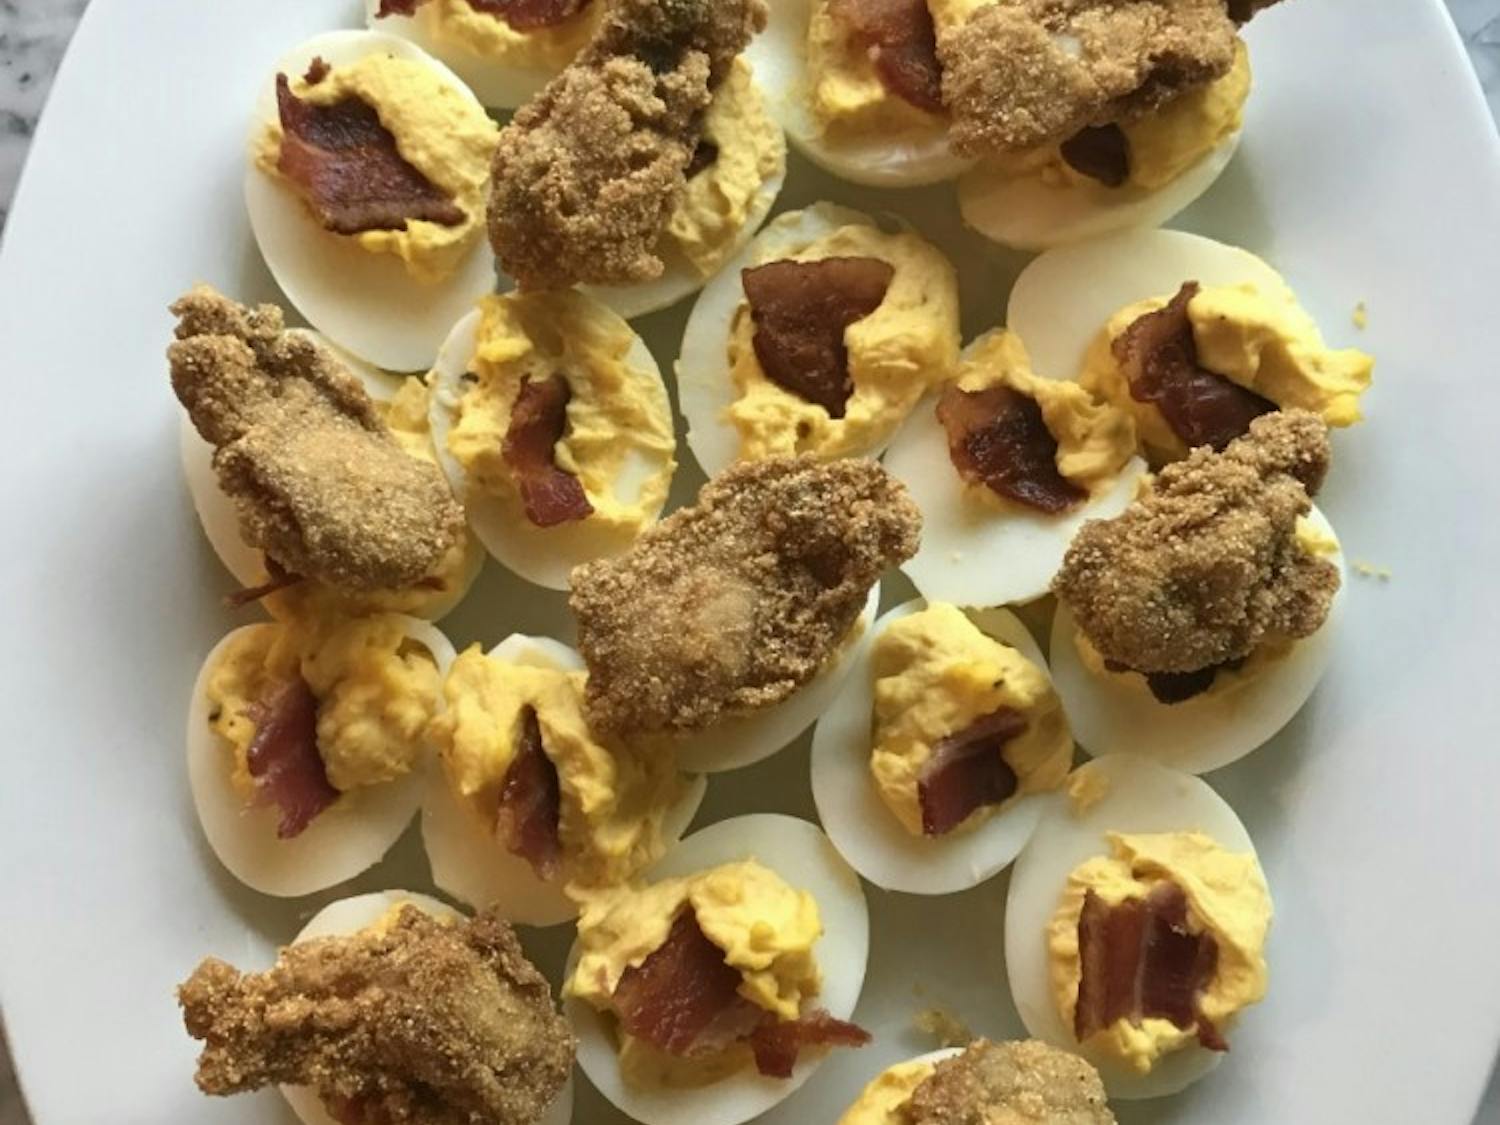 Deviled Eggs - Topped with Fried Oysters of Bacon